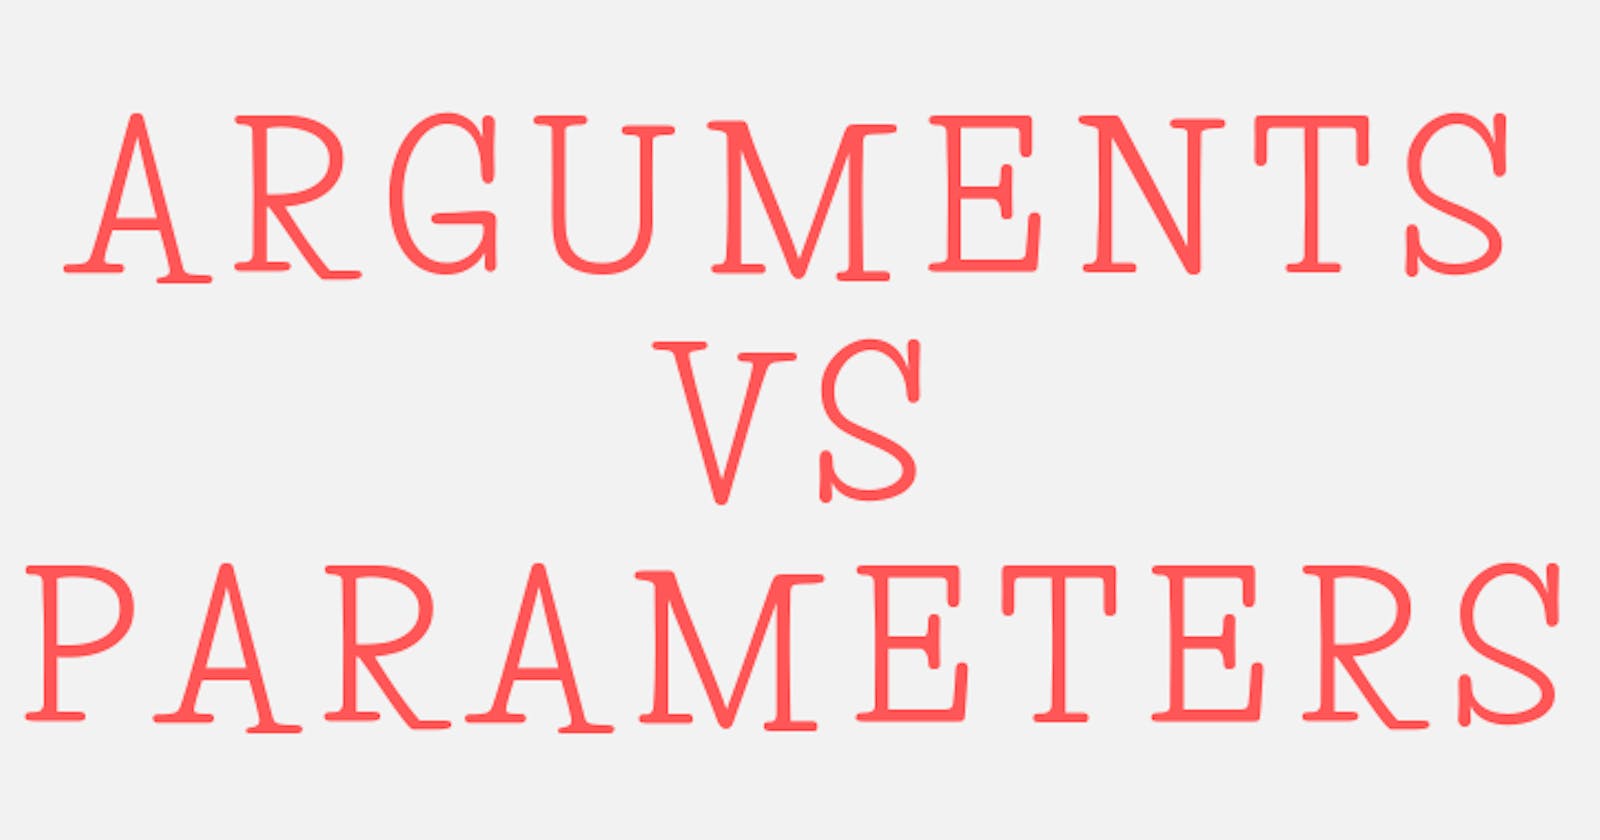 Know the difference between Argument and Parameter in programming